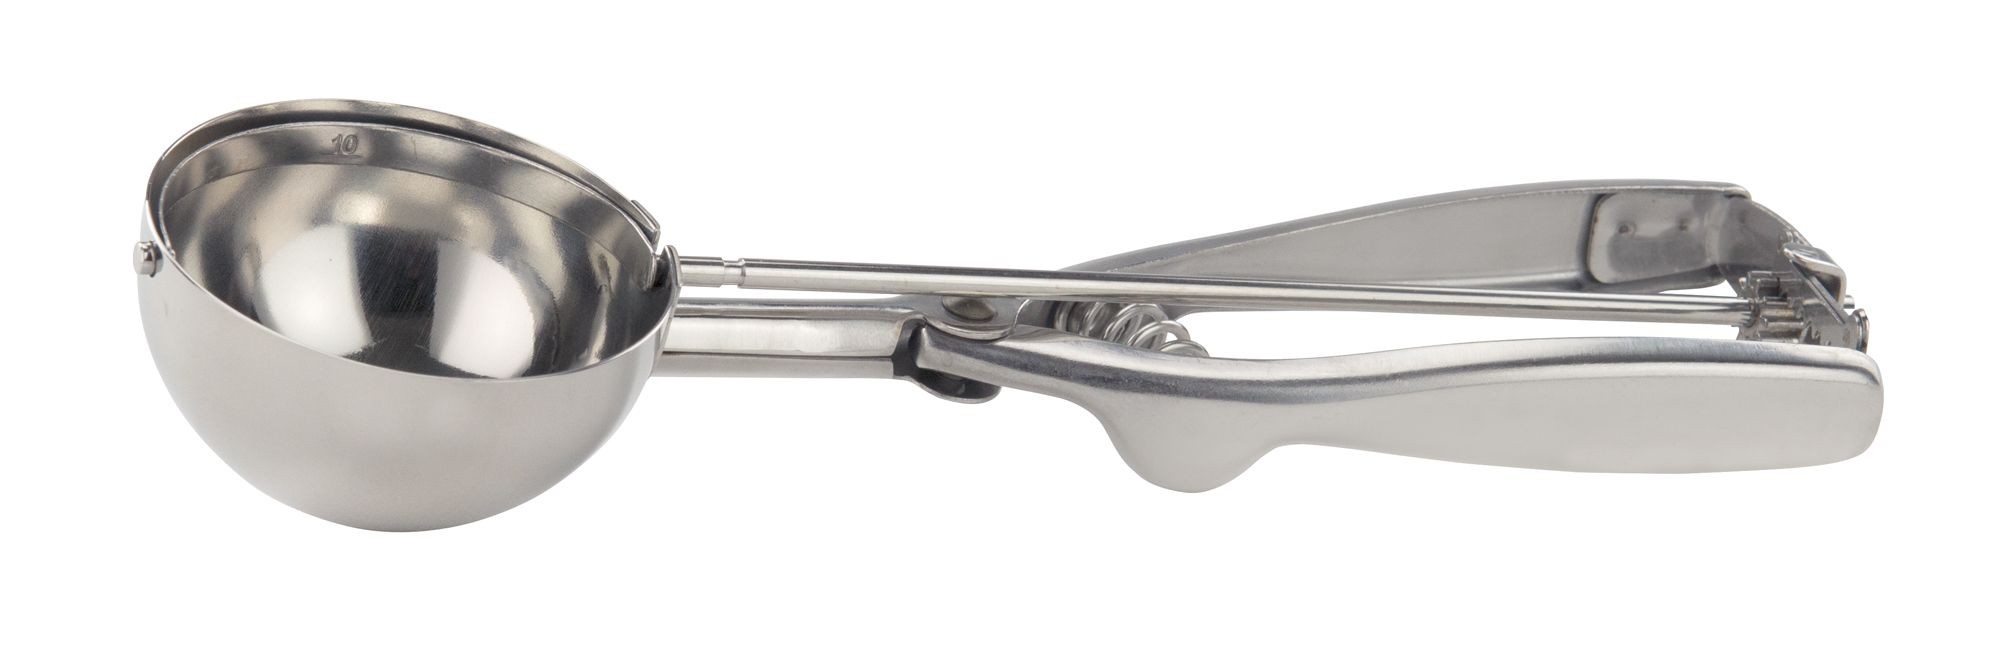 Winco ISS-10 Stainless Steel 3-3/4 oz. Disher/Portioner, Size 10